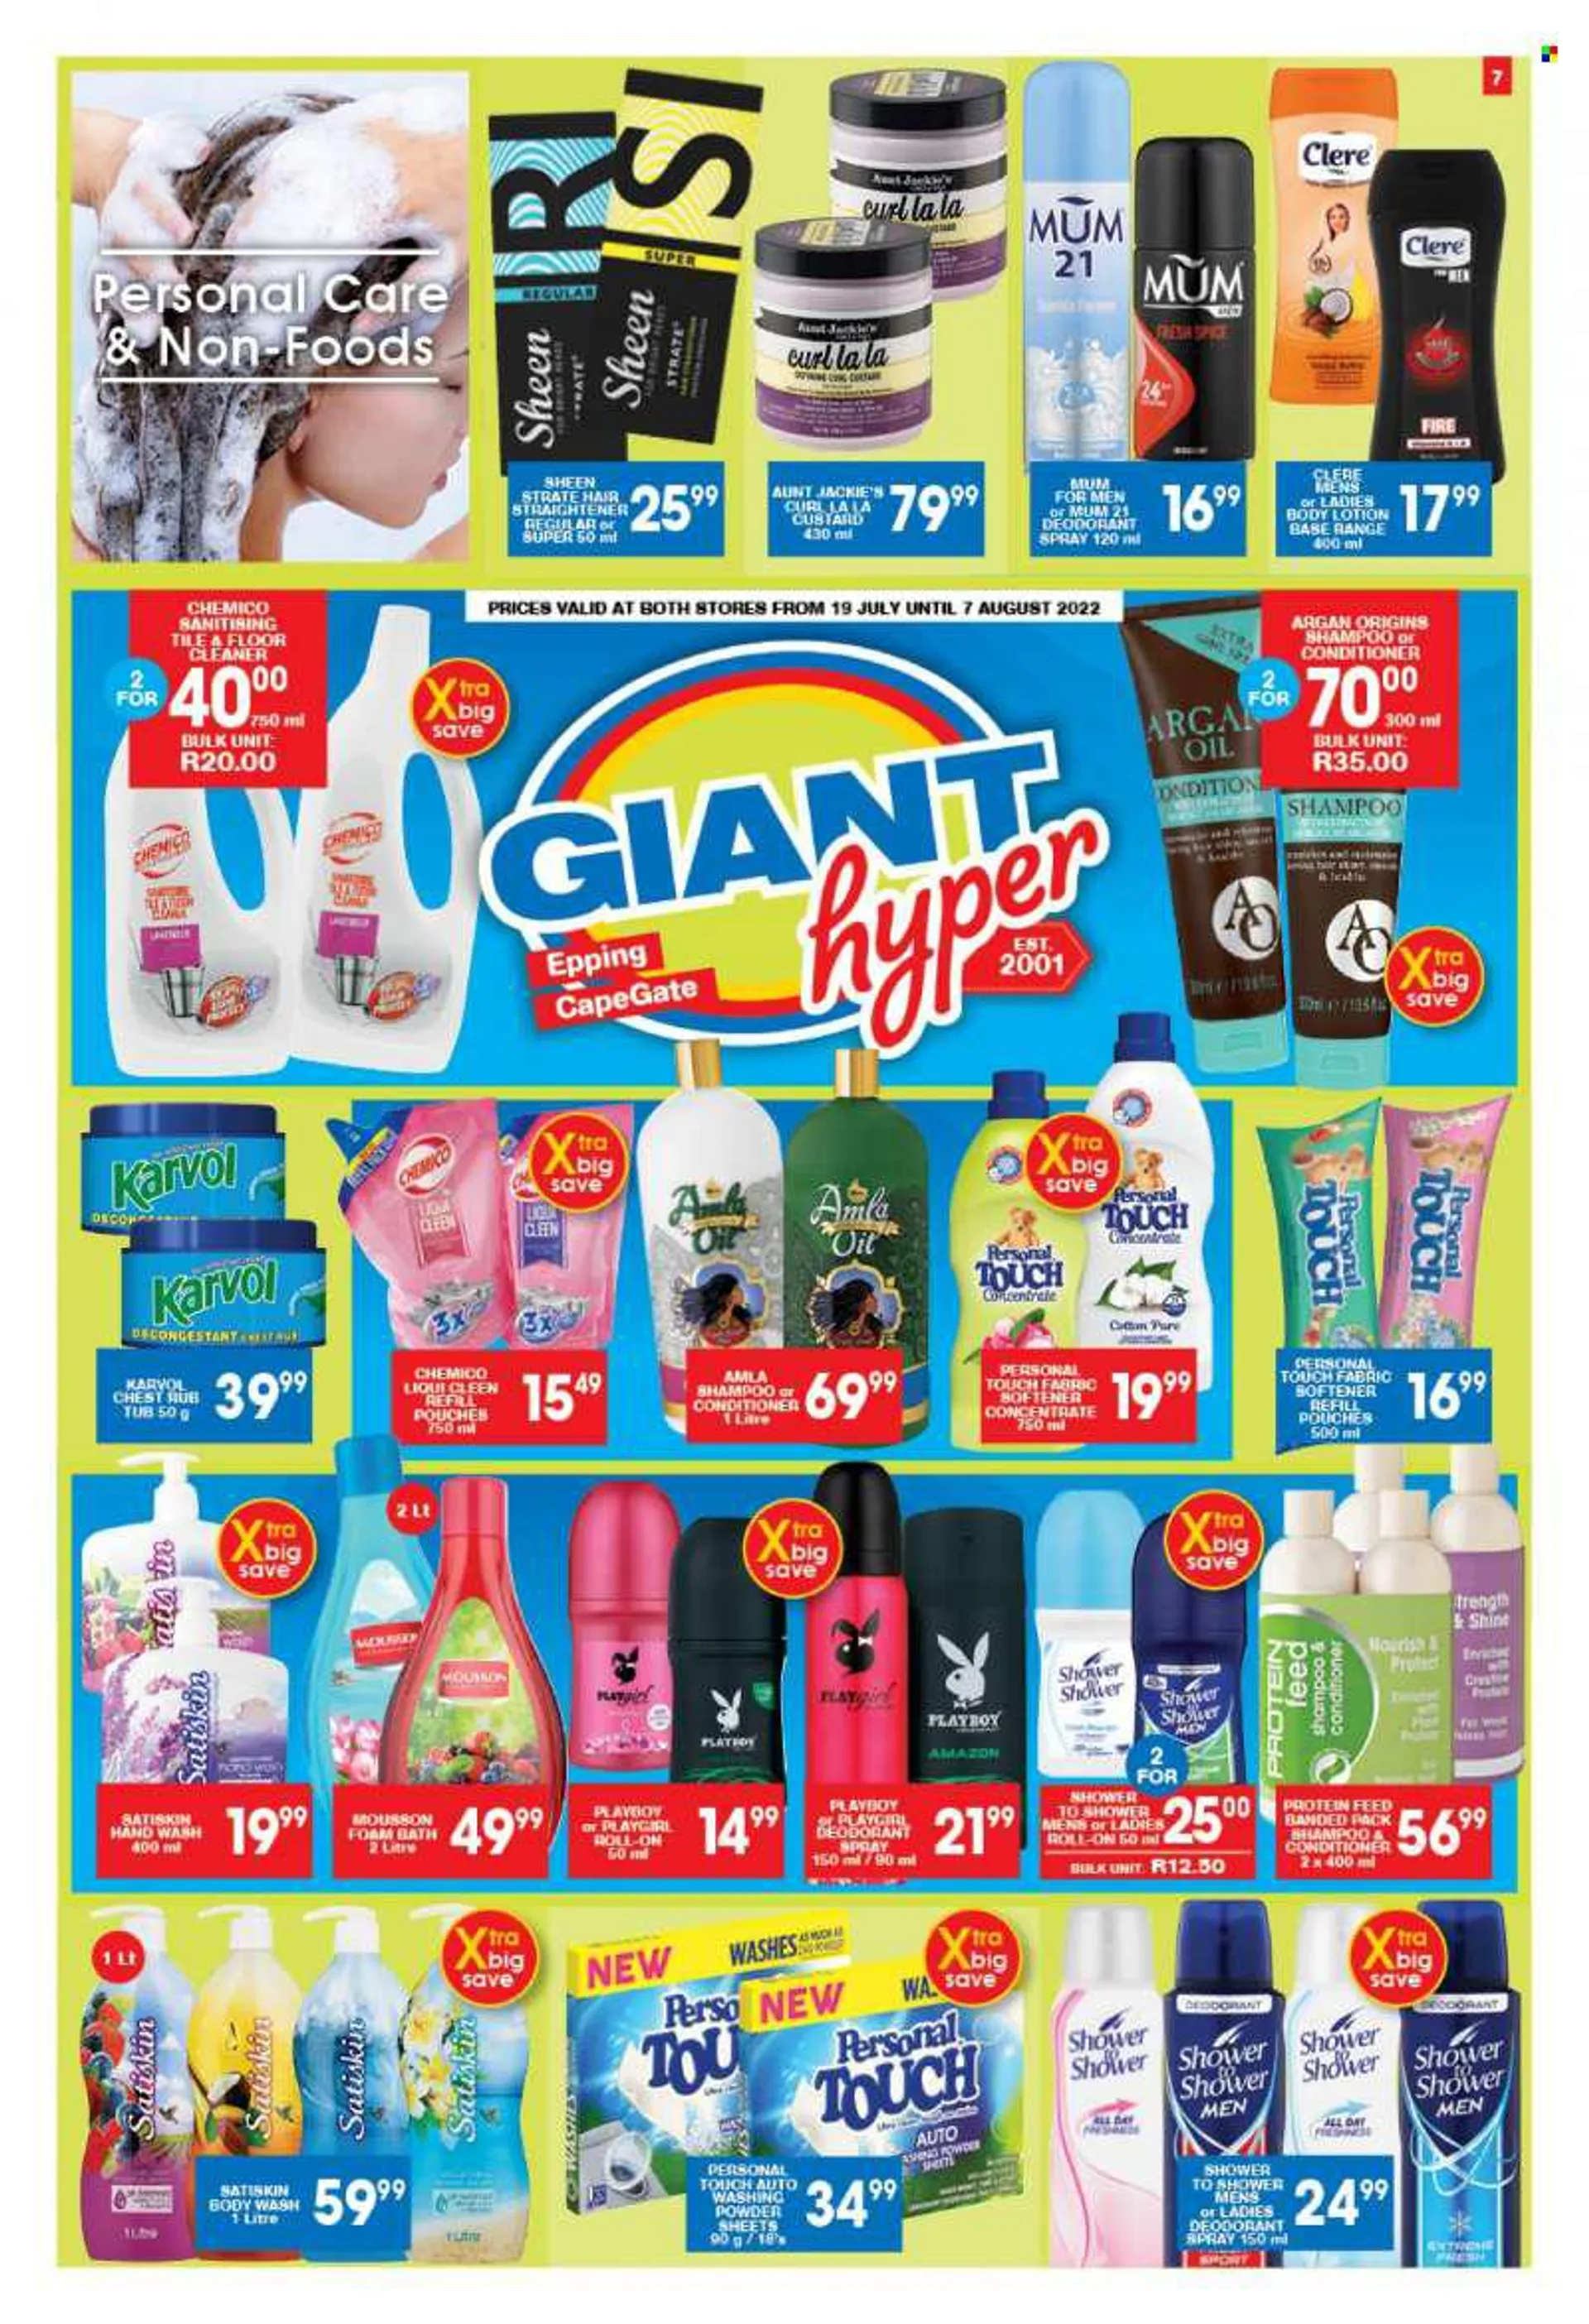 Giant Hyper catalogue  - 19/07/2022 - 07/08/2022 - Sales products - custard, plant protein, spice, oil, floor cleaner, cleaner, fabric softener, softener refill, laundry powder, body wash, shampoo, bath foam, hand wash, Mousson, Satiskin, conditioner, Aun